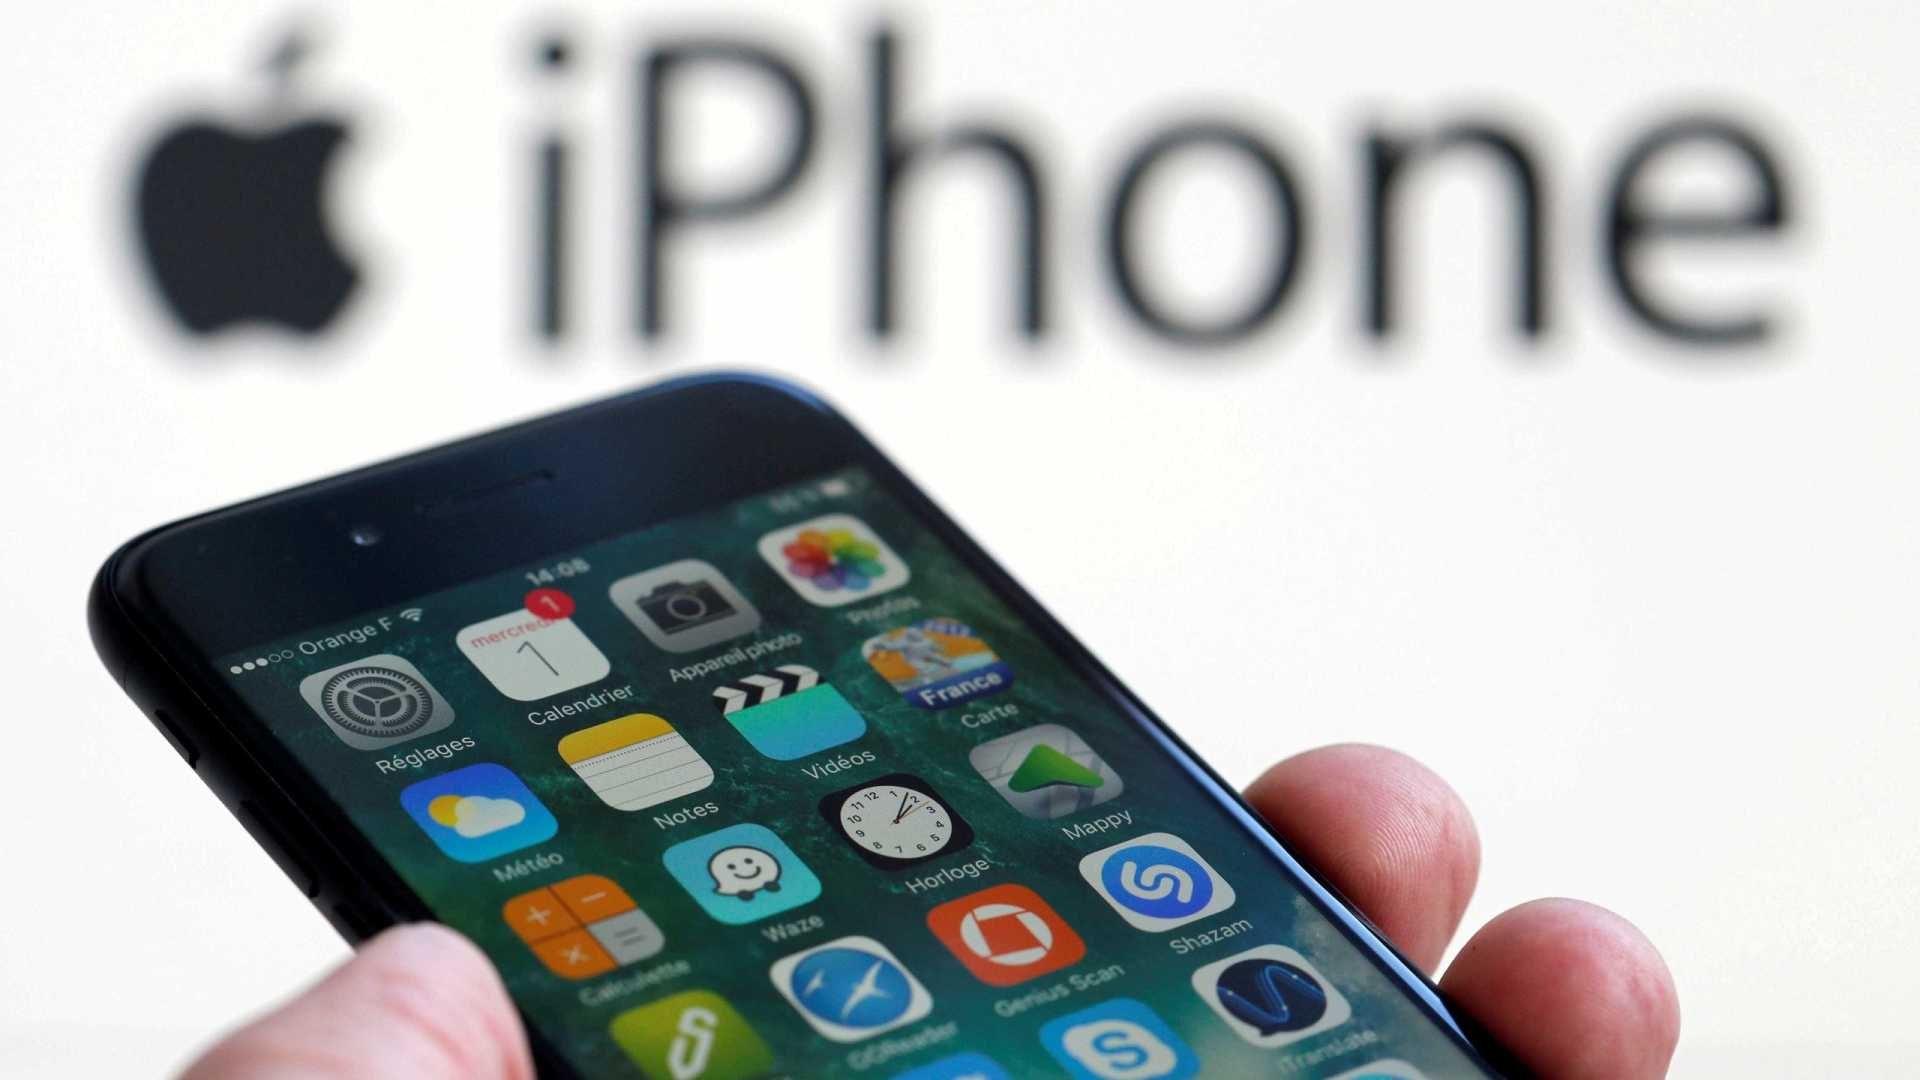 Apple Sued for Throttling iPhones Without User Consent